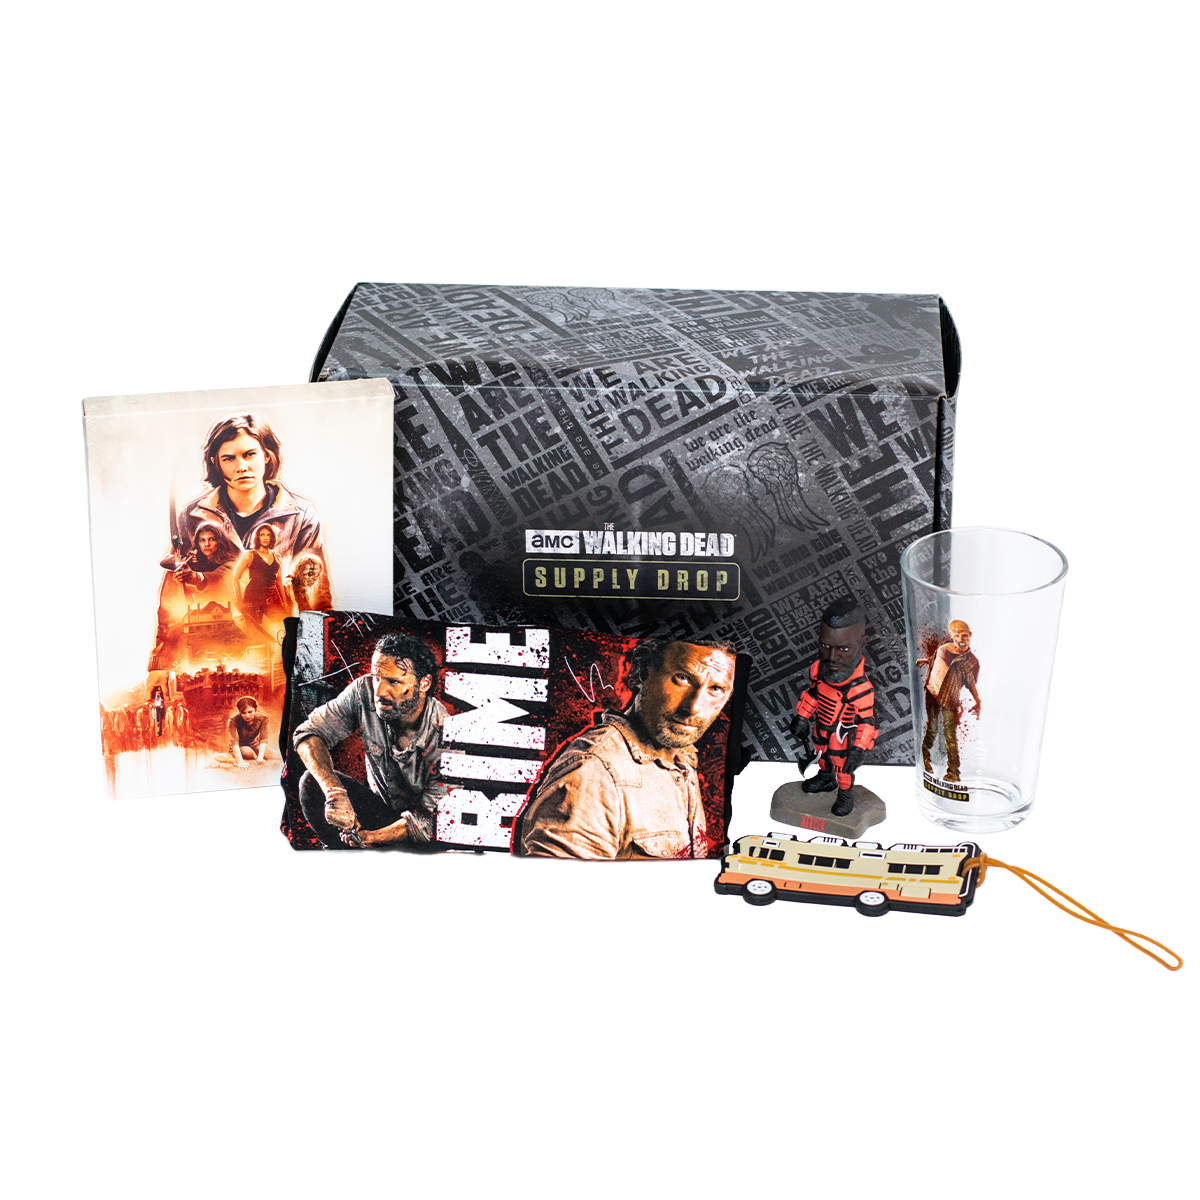 The Walking Dead Merchandise Collection